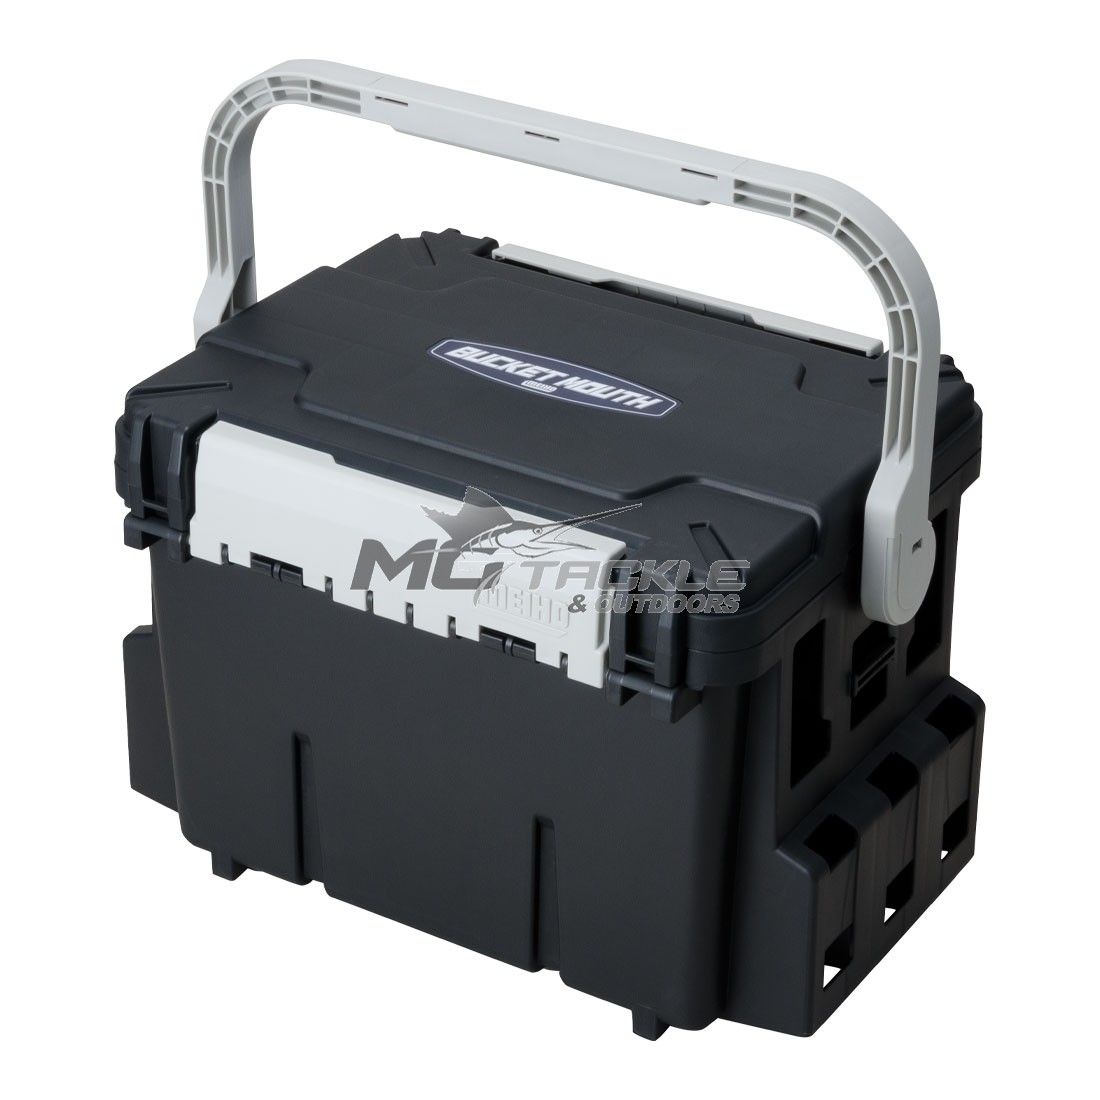 Versus Meiho Bucket Mouth Tackle Box